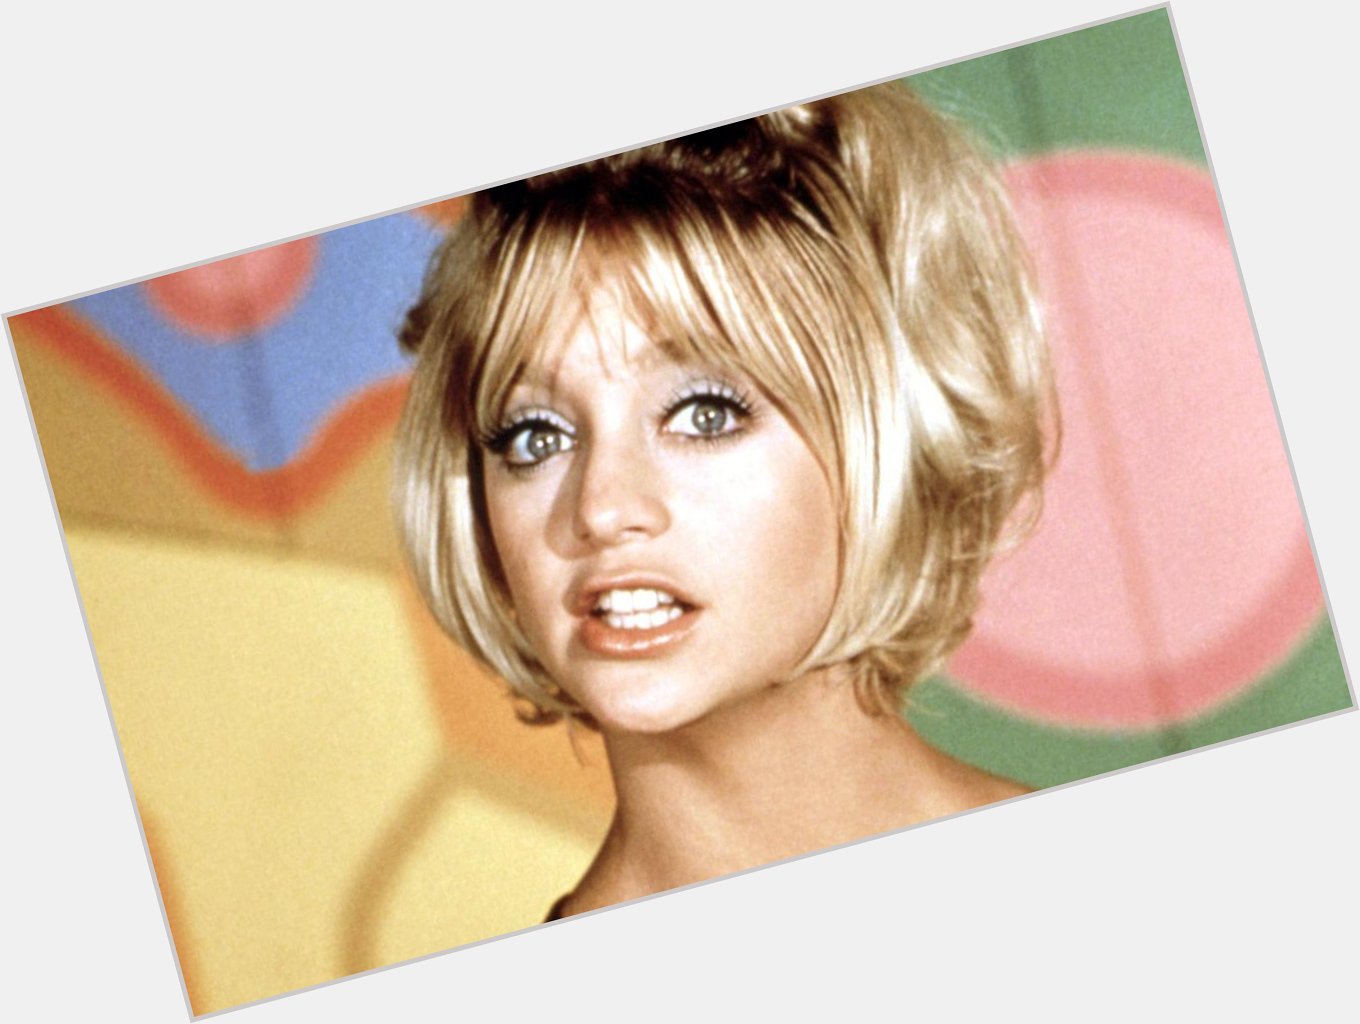 Happy Birthday to from all of us at DoYouRemember!
What\s your favorite Goldie Hawn film? 